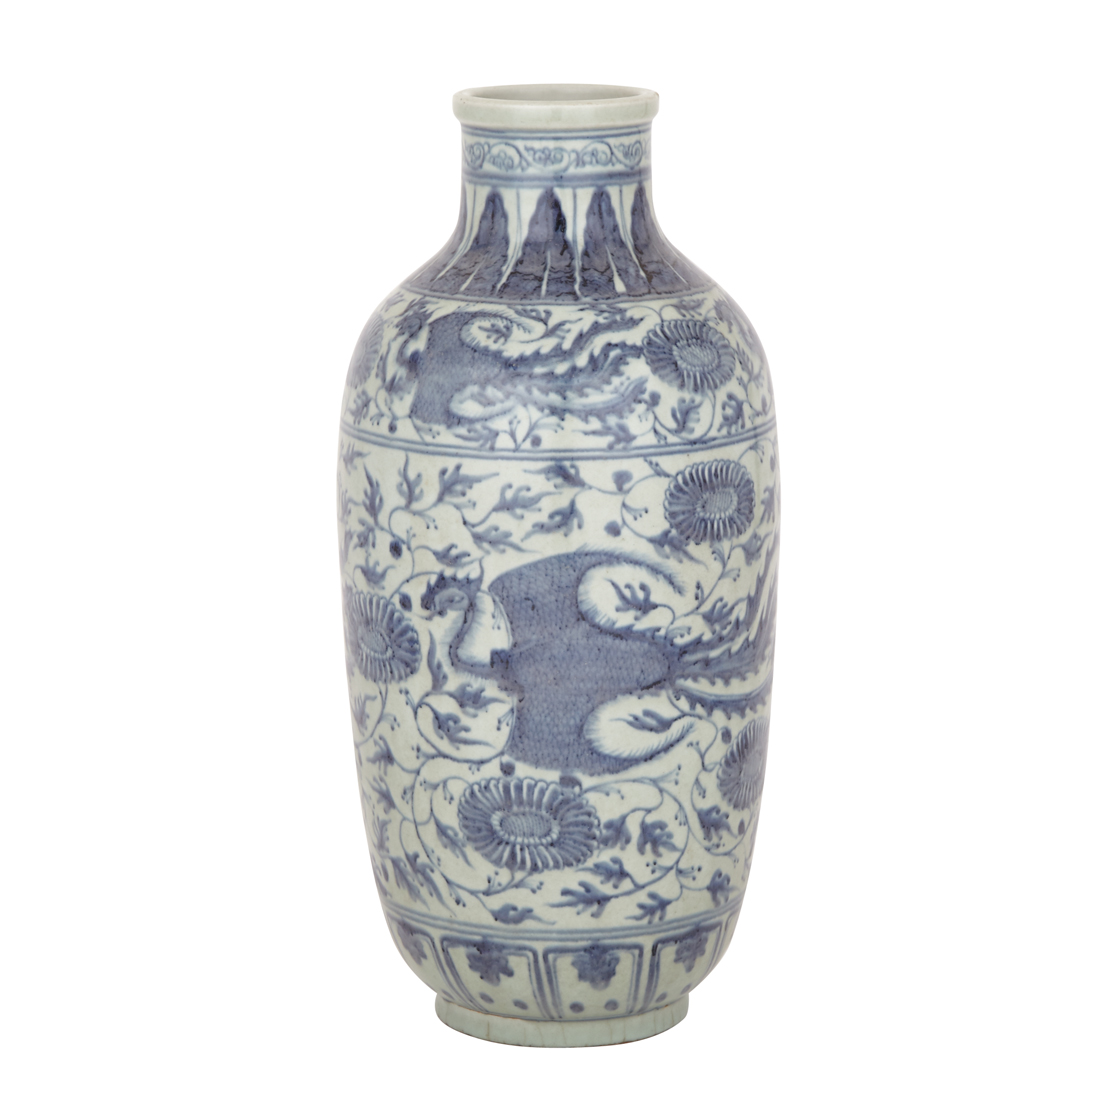 Blue and White Baluster Vase with Phoenix and Chrysanthemums